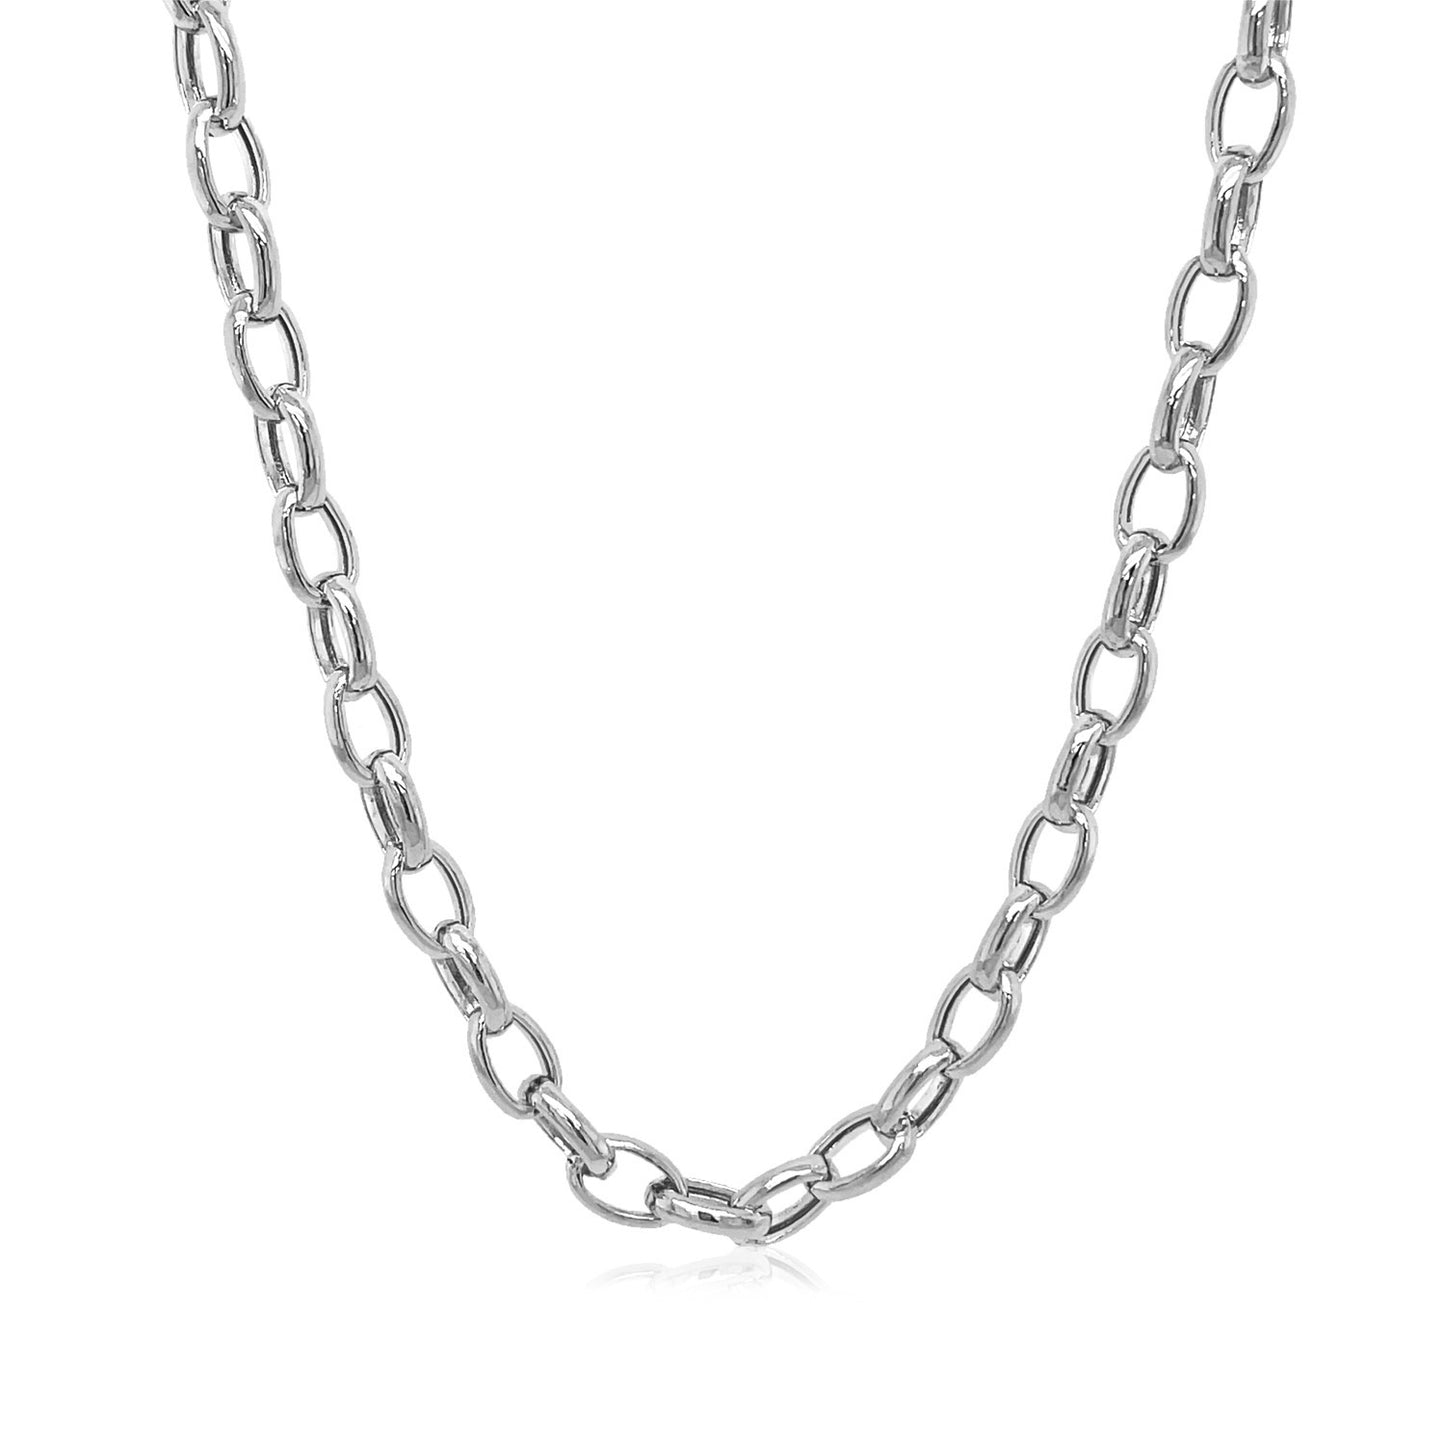 4.6mm 14k White Gold Oval Rolo Chain